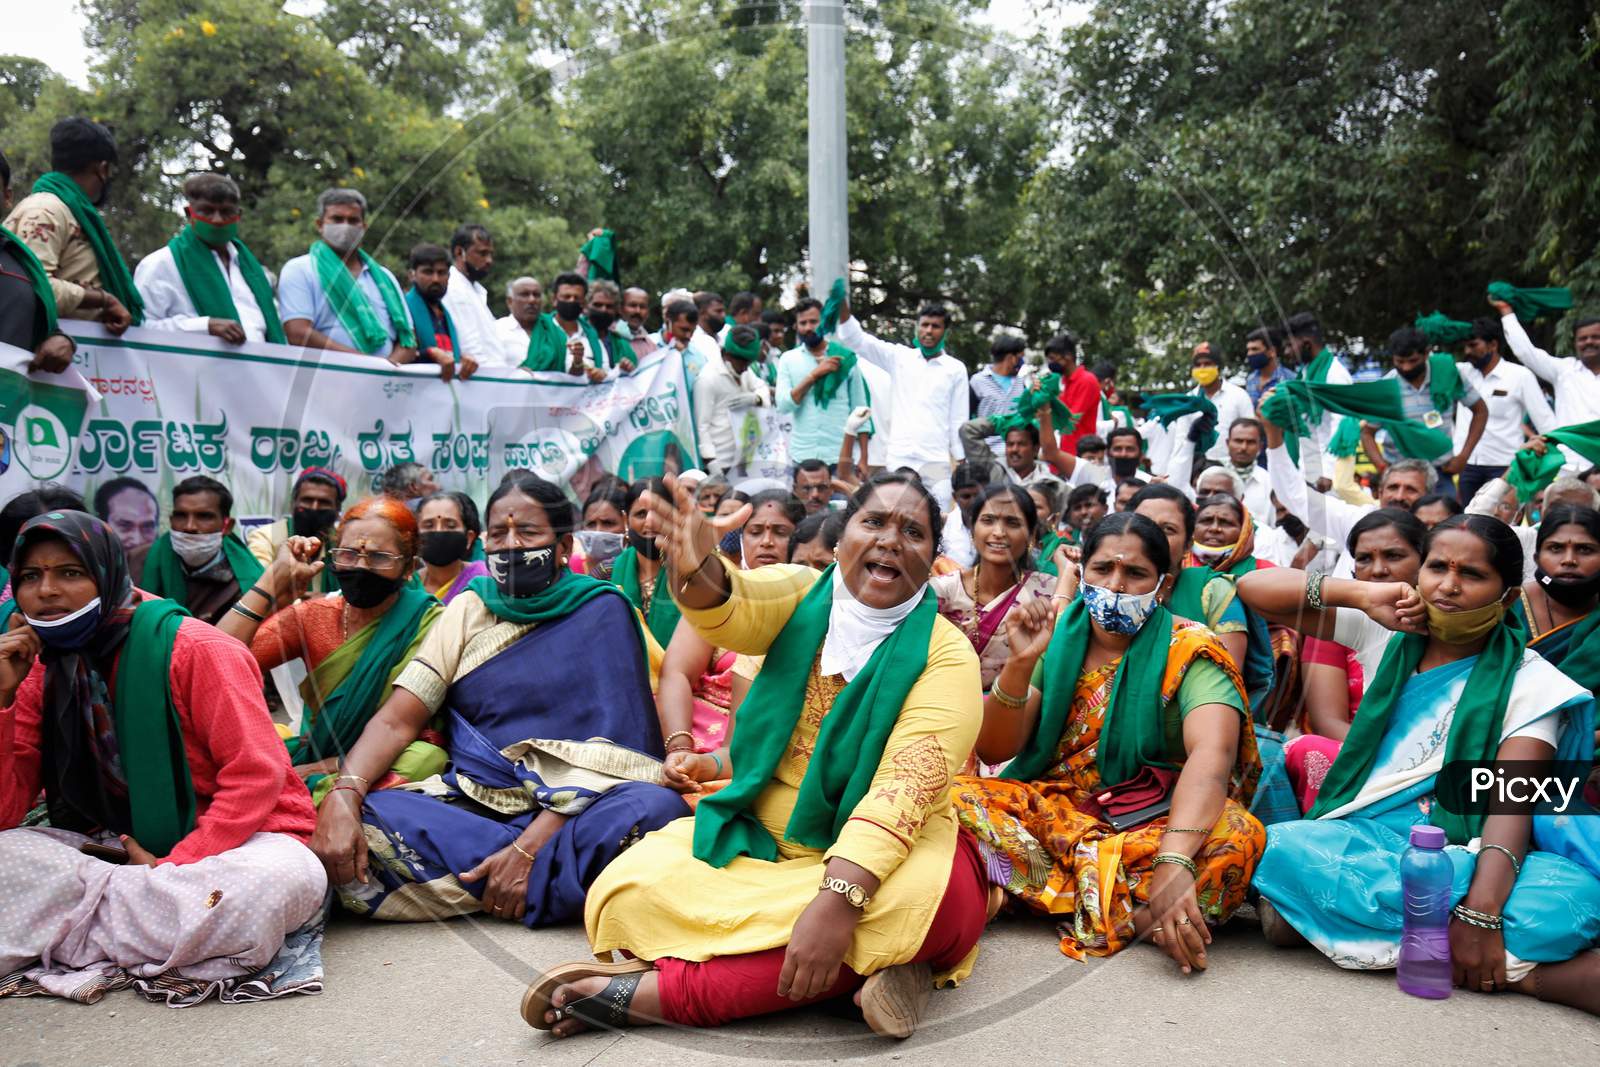 People chant slogans against the government and wave flags during a protest against the passage of two controversial farm bills by the country’s parliament in Bangalore, India.